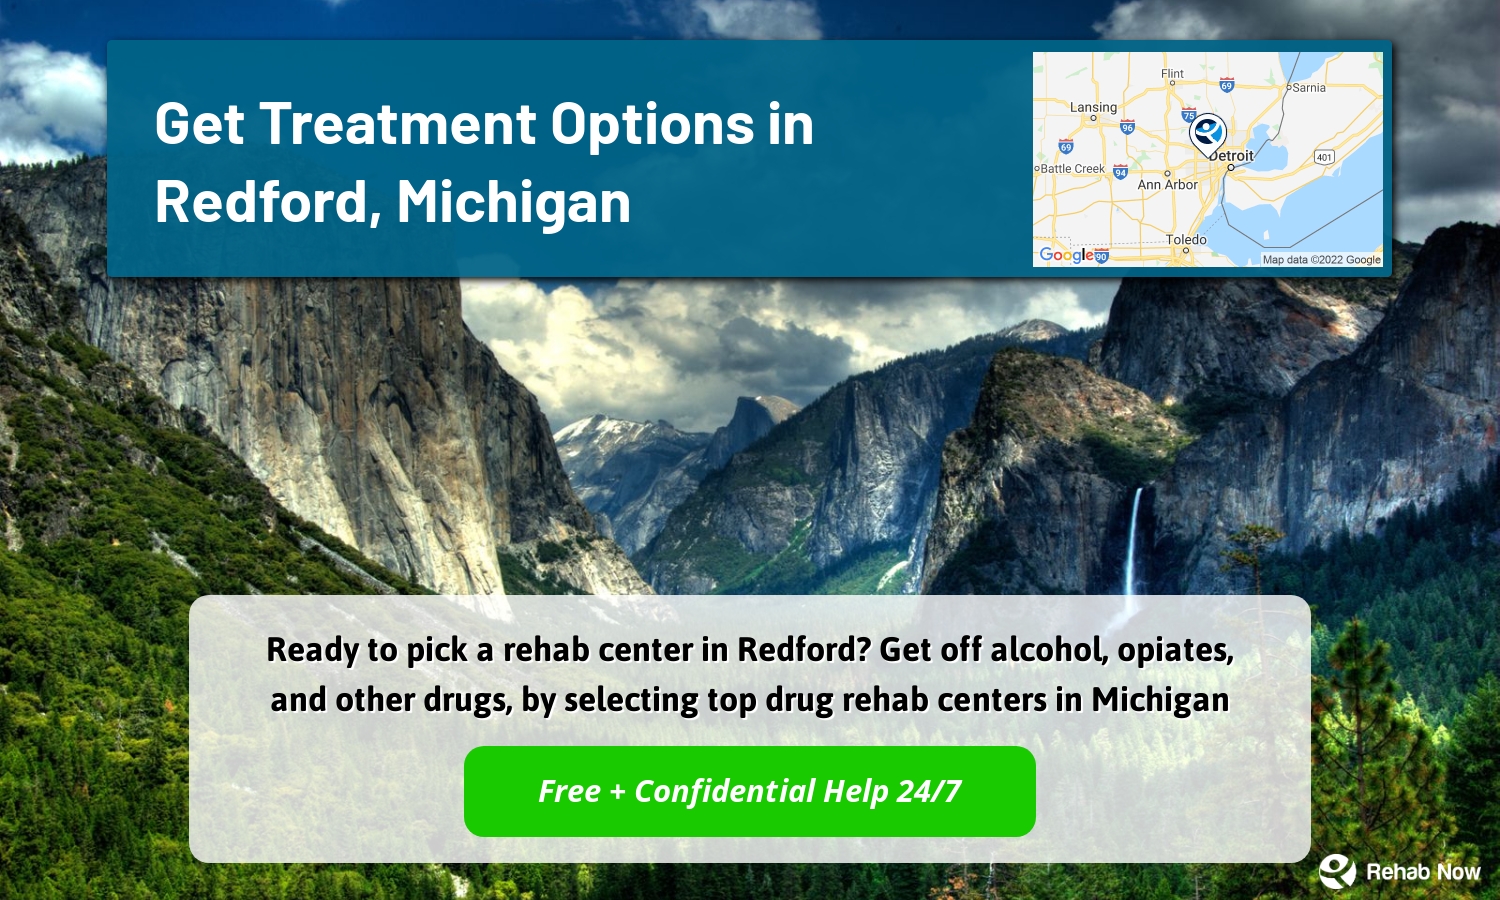 Ready to pick a rehab center in Redford? Get off alcohol, opiates, and other drugs, by selecting top drug rehab centers in Michigan